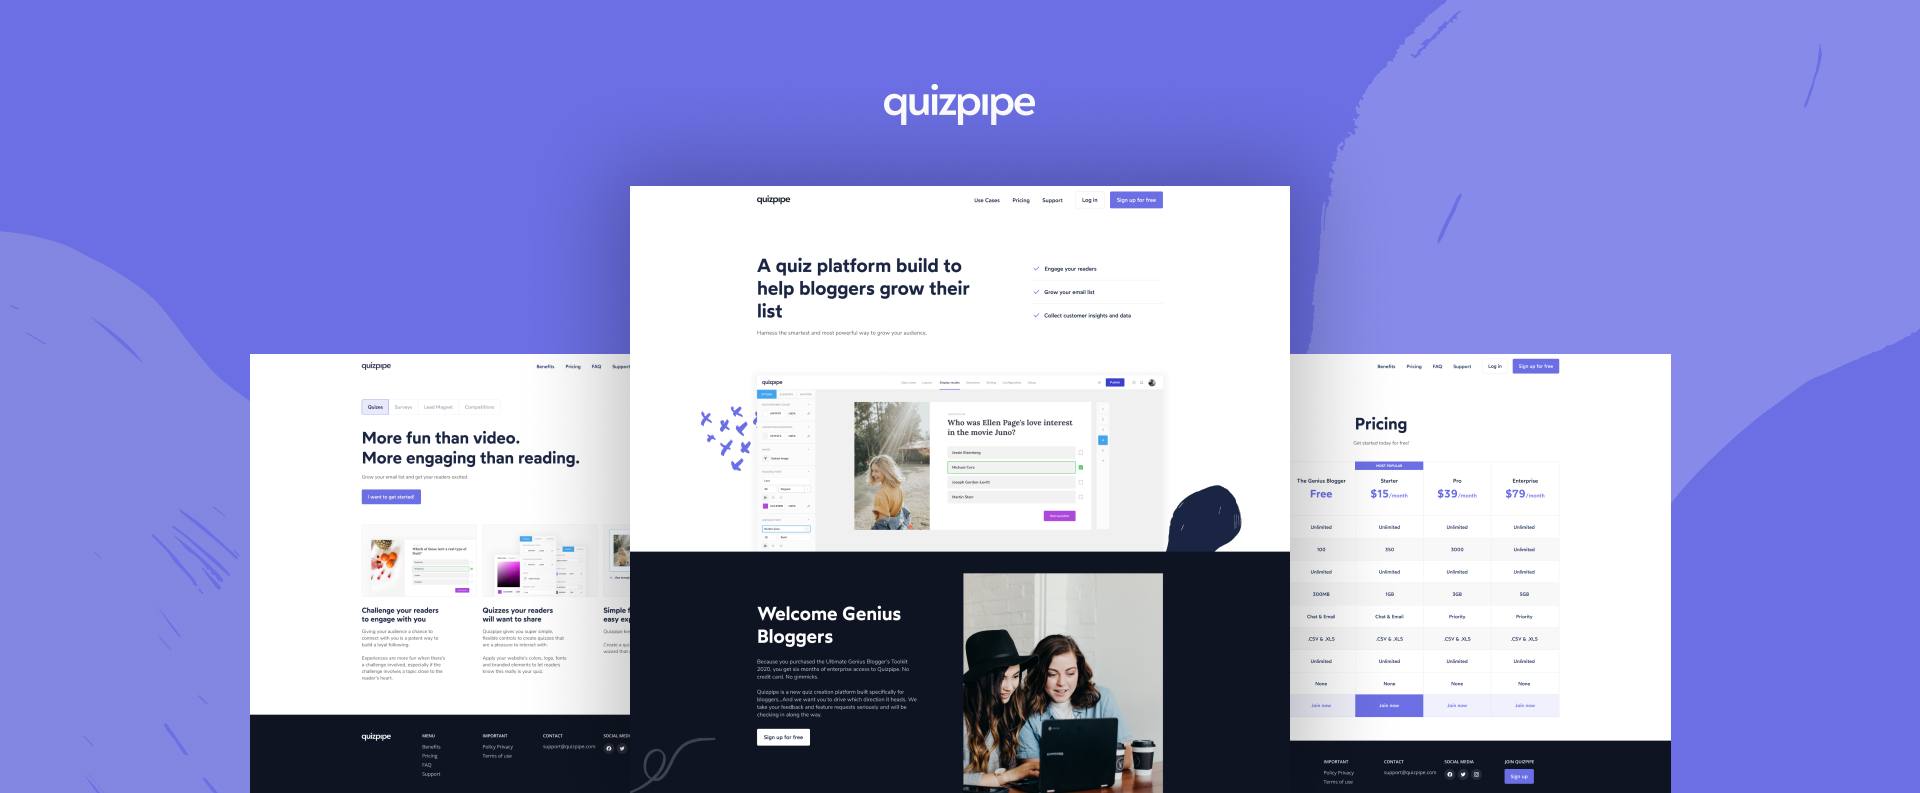 Quizpipe banner with design elements